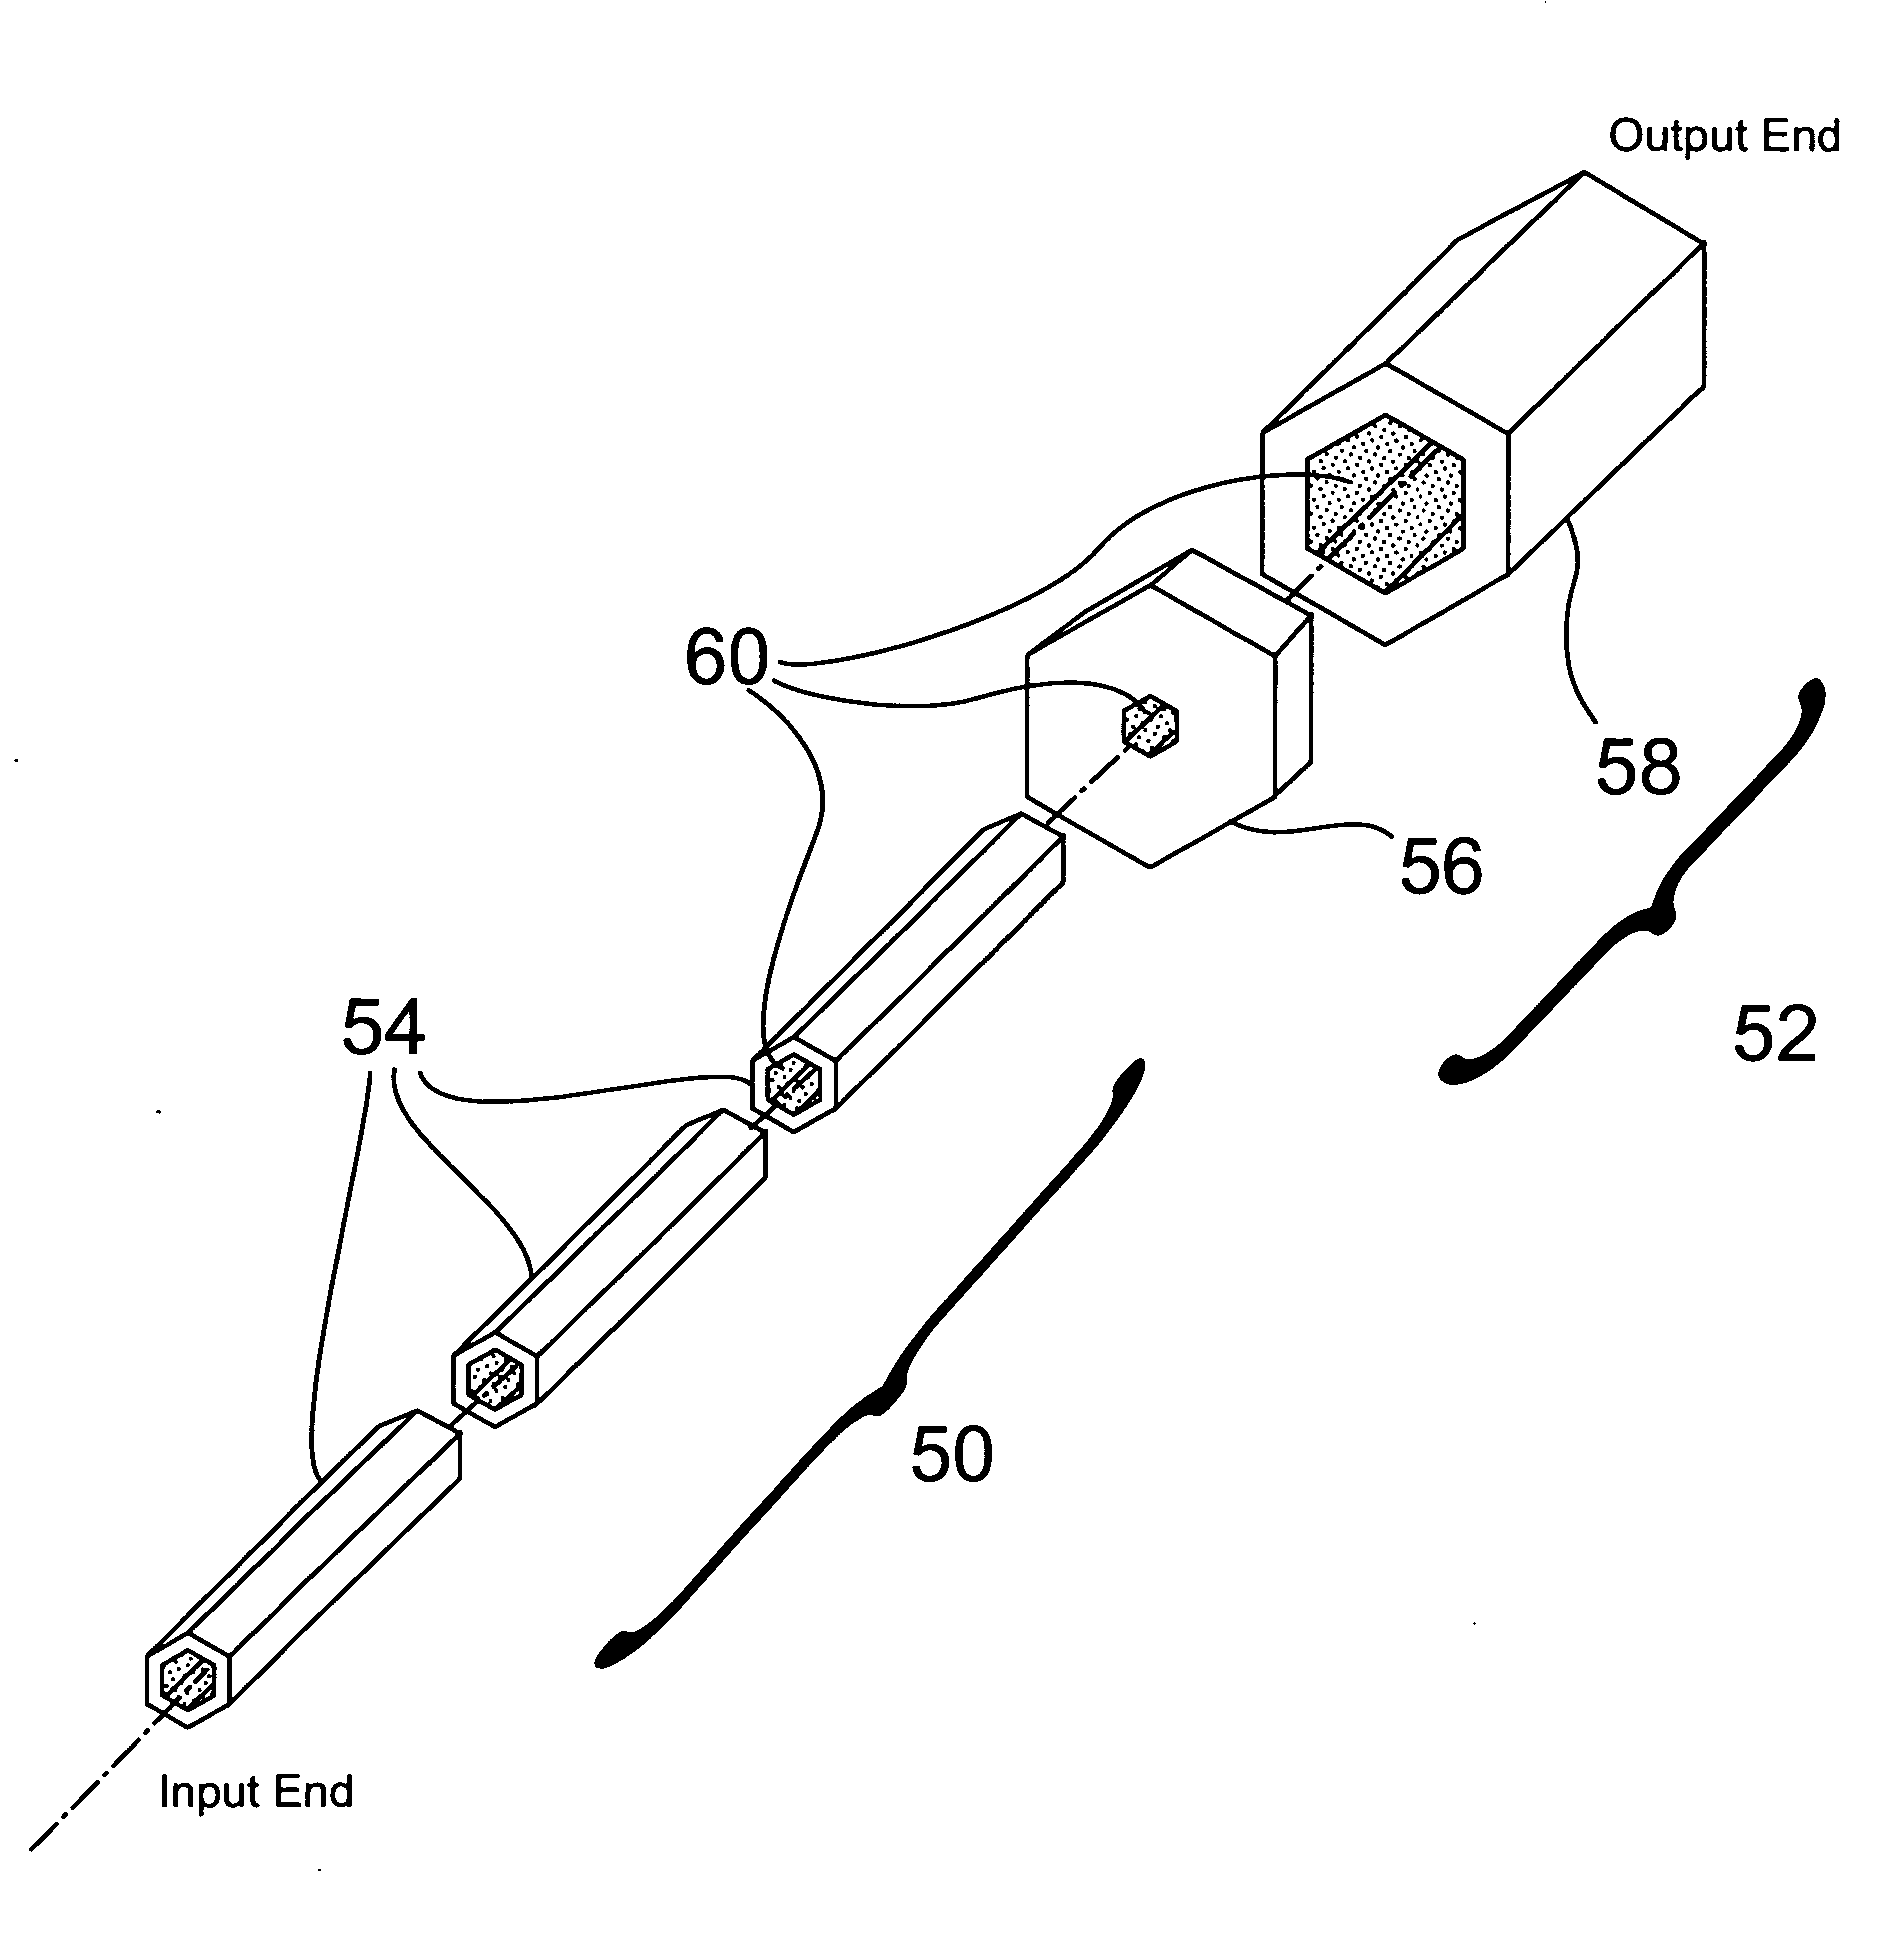 Illumination system optimized for throughput and manufacturability